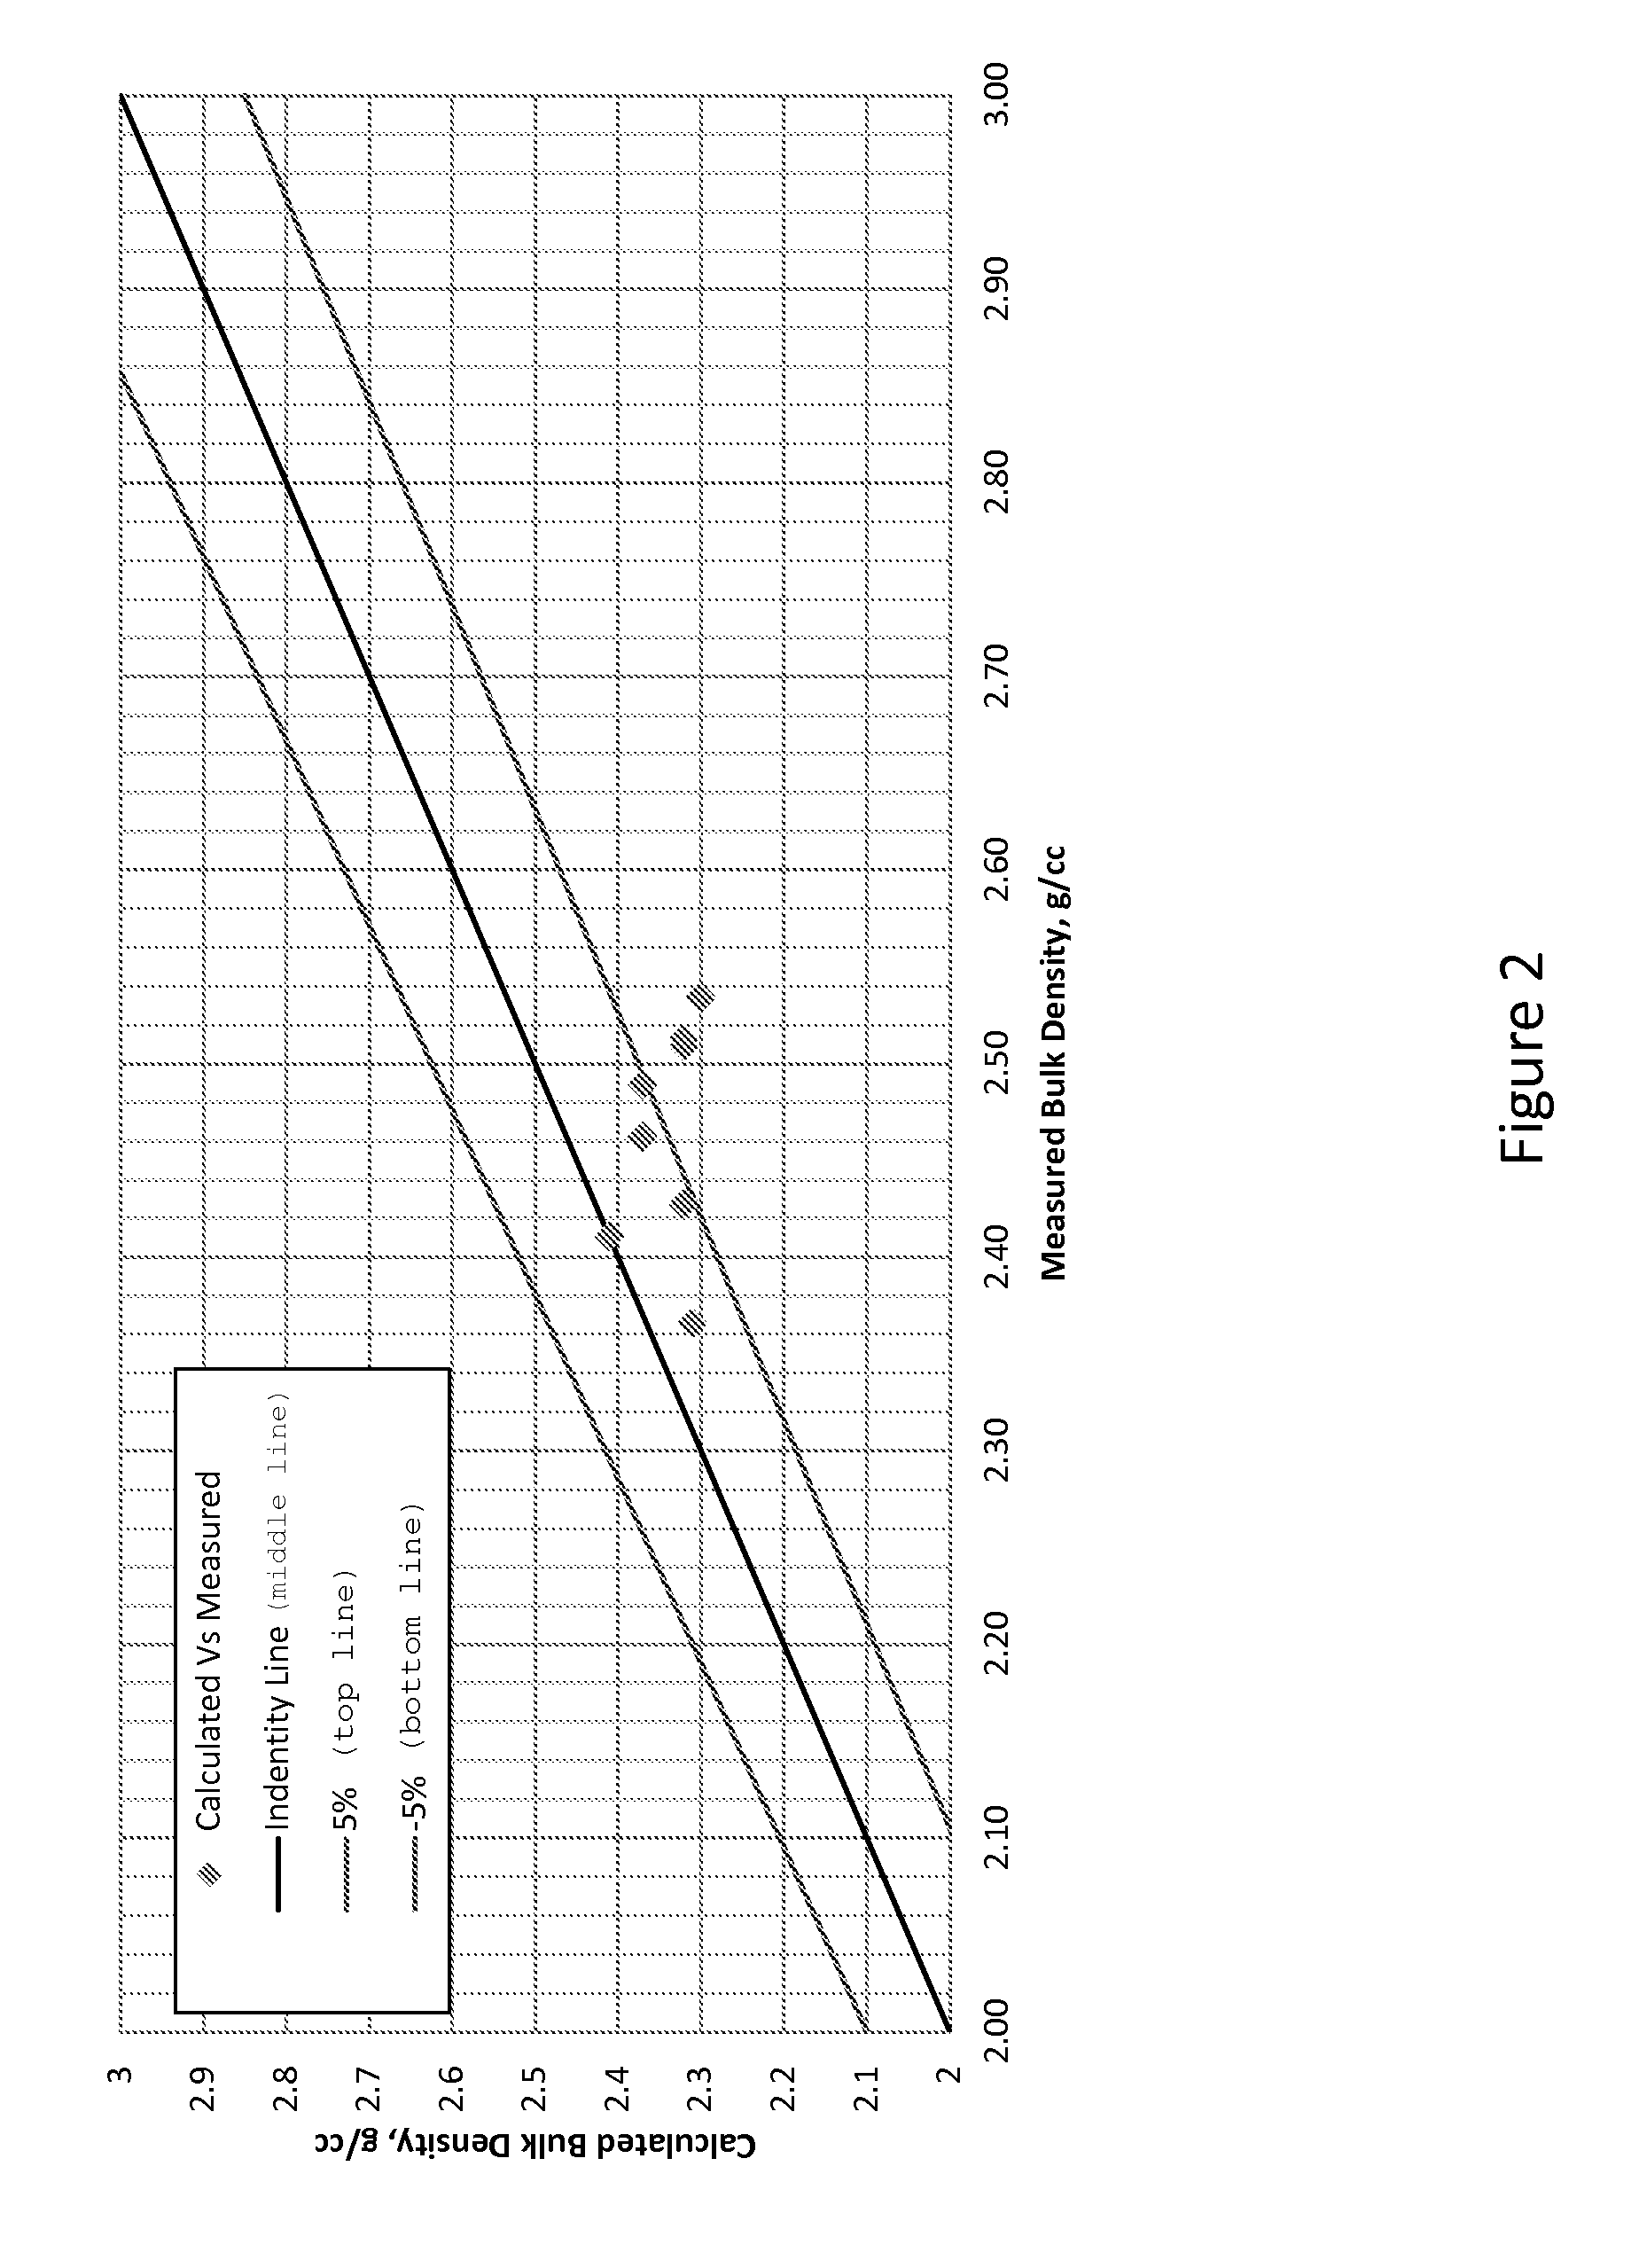 Method For Estimating Effective Atomic Number And Bulk Density Of Rock Samples Using Dual Energy X-Ray Computed Tomographic Imaging